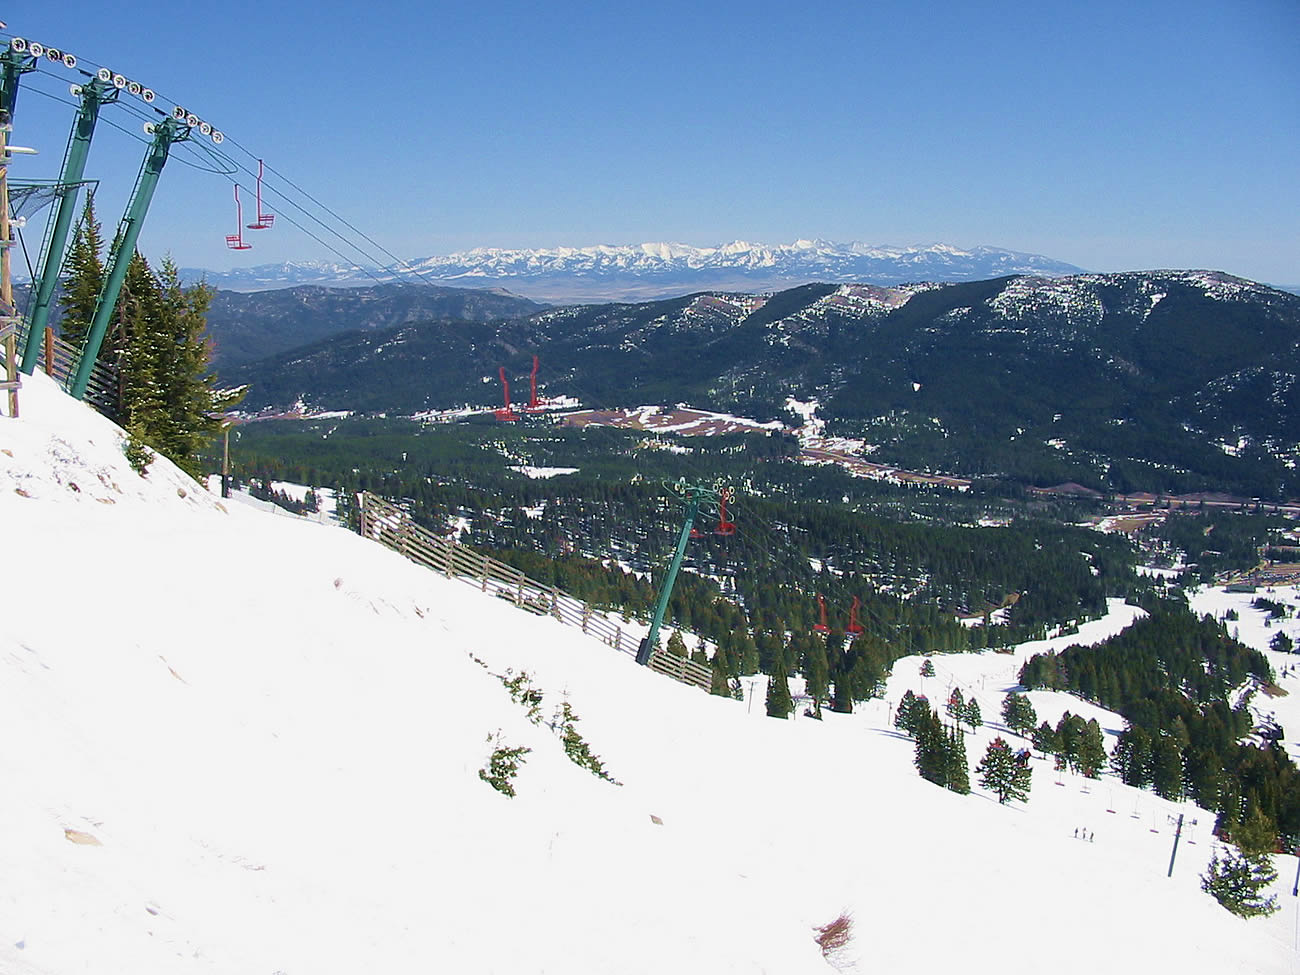 View of Ski Area From the Base Area